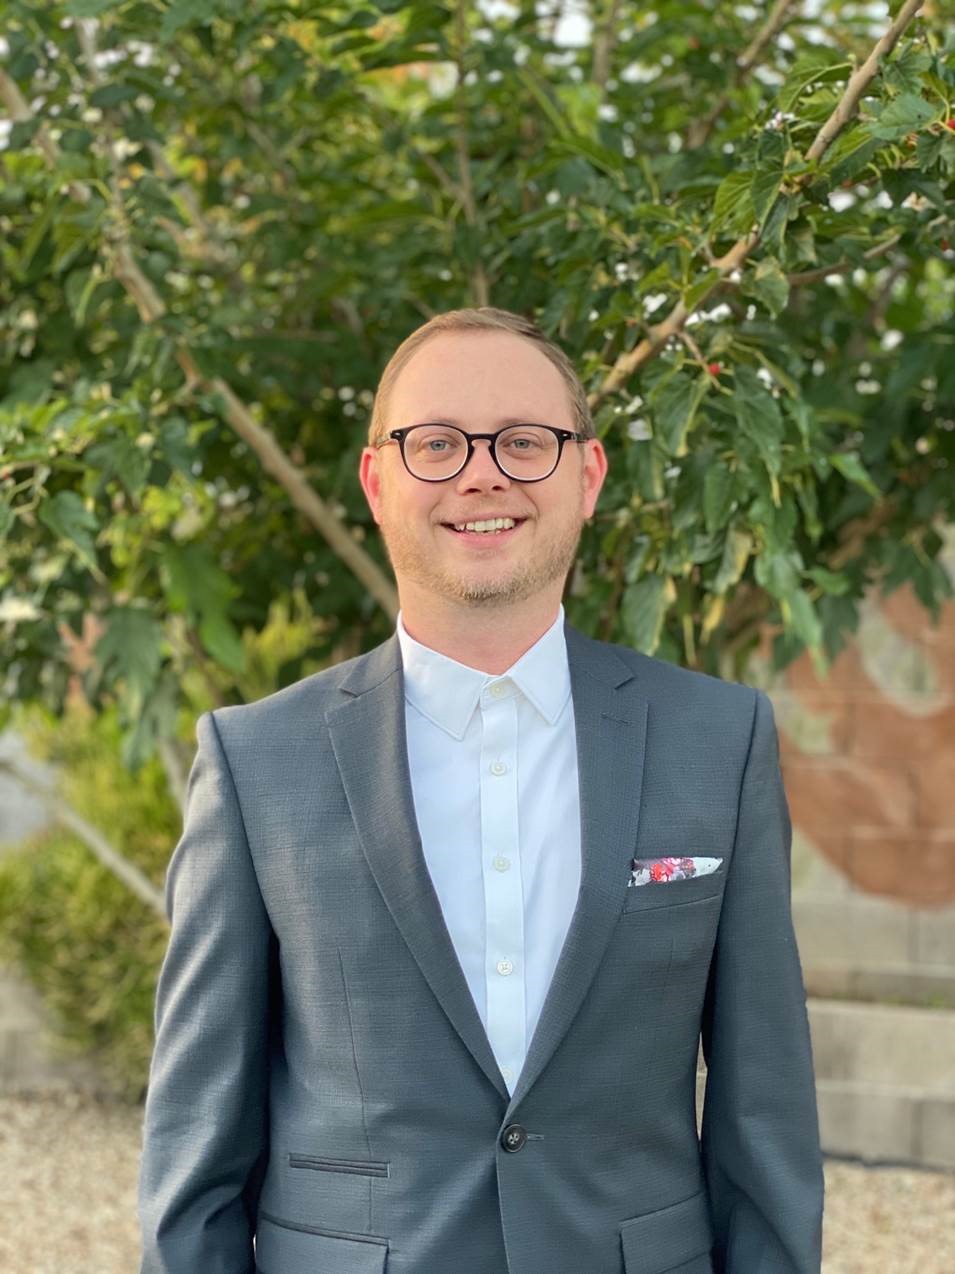 Mark Hayes is the General Manager of Element by Westin SkySong in Scottsdale, Arizona. He has been in Hospitality for over 9 years. Prior to starting with Element in July of 2020, he worked for Holiday Inn & Suites for 3 years and Graduate Hotels for 5 years.

Mark started as… Continue Reading..